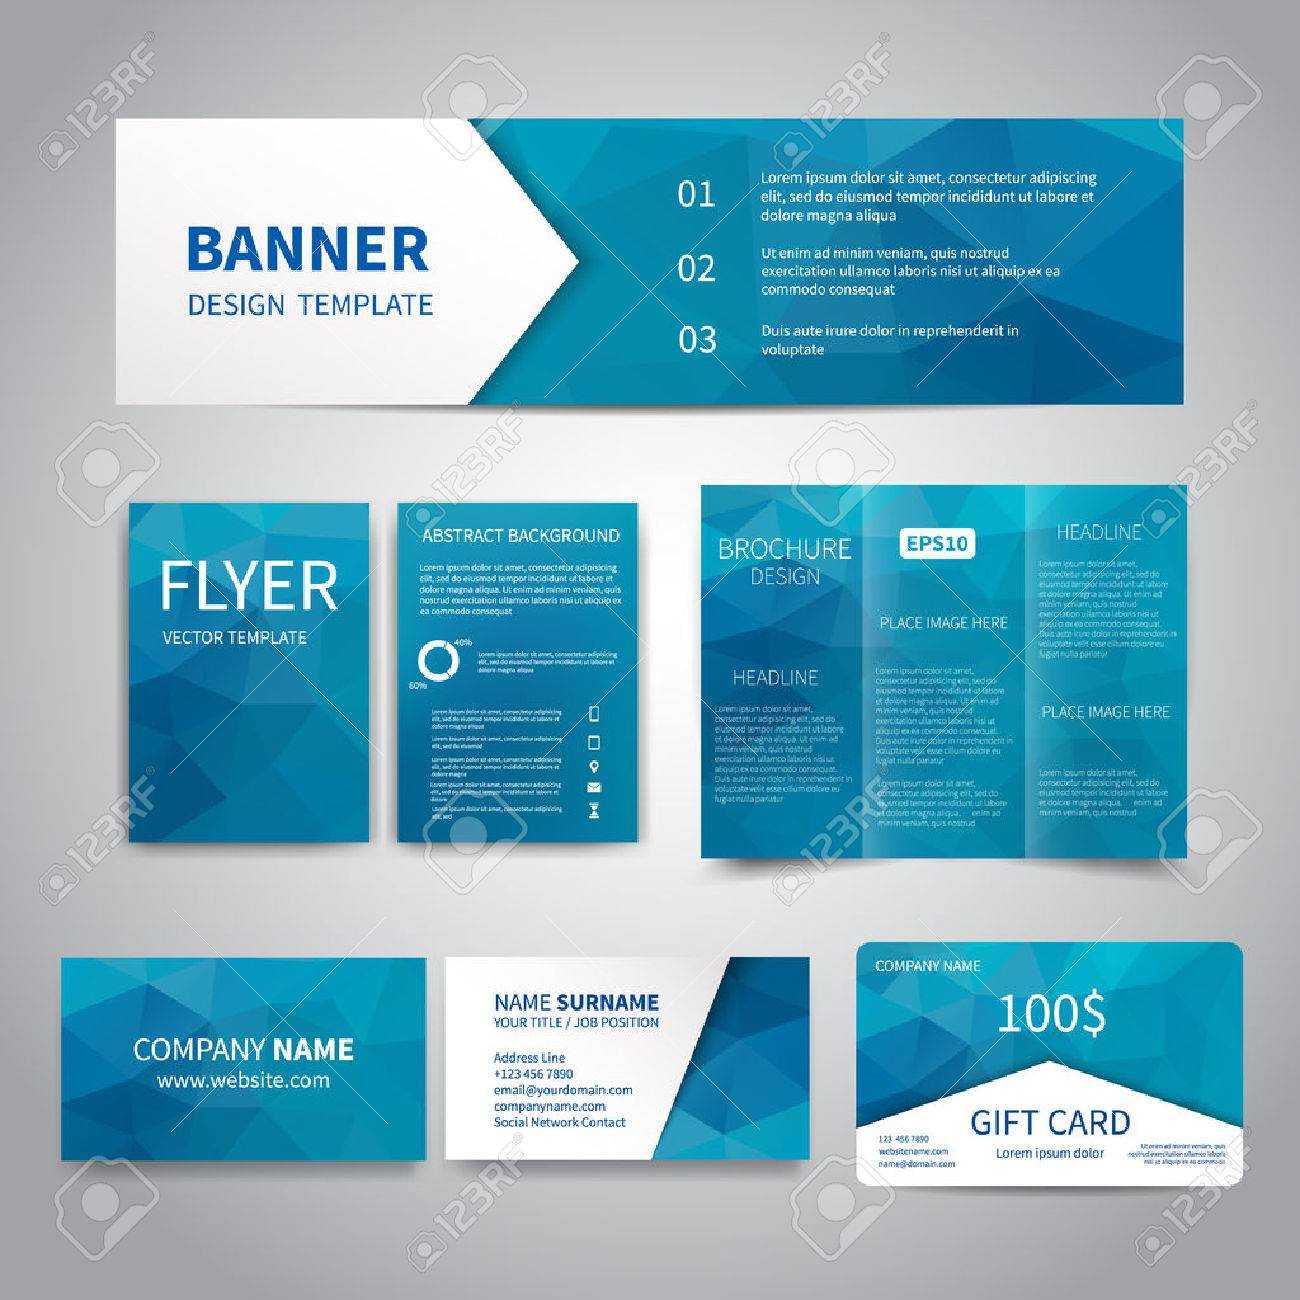 Banner, Flyers, Brochure, Business Cards, Gift Card Design Templates Set  With Geometric Triangular Blue Background. Corporate Identity Set, Within Advertising Cards Templates